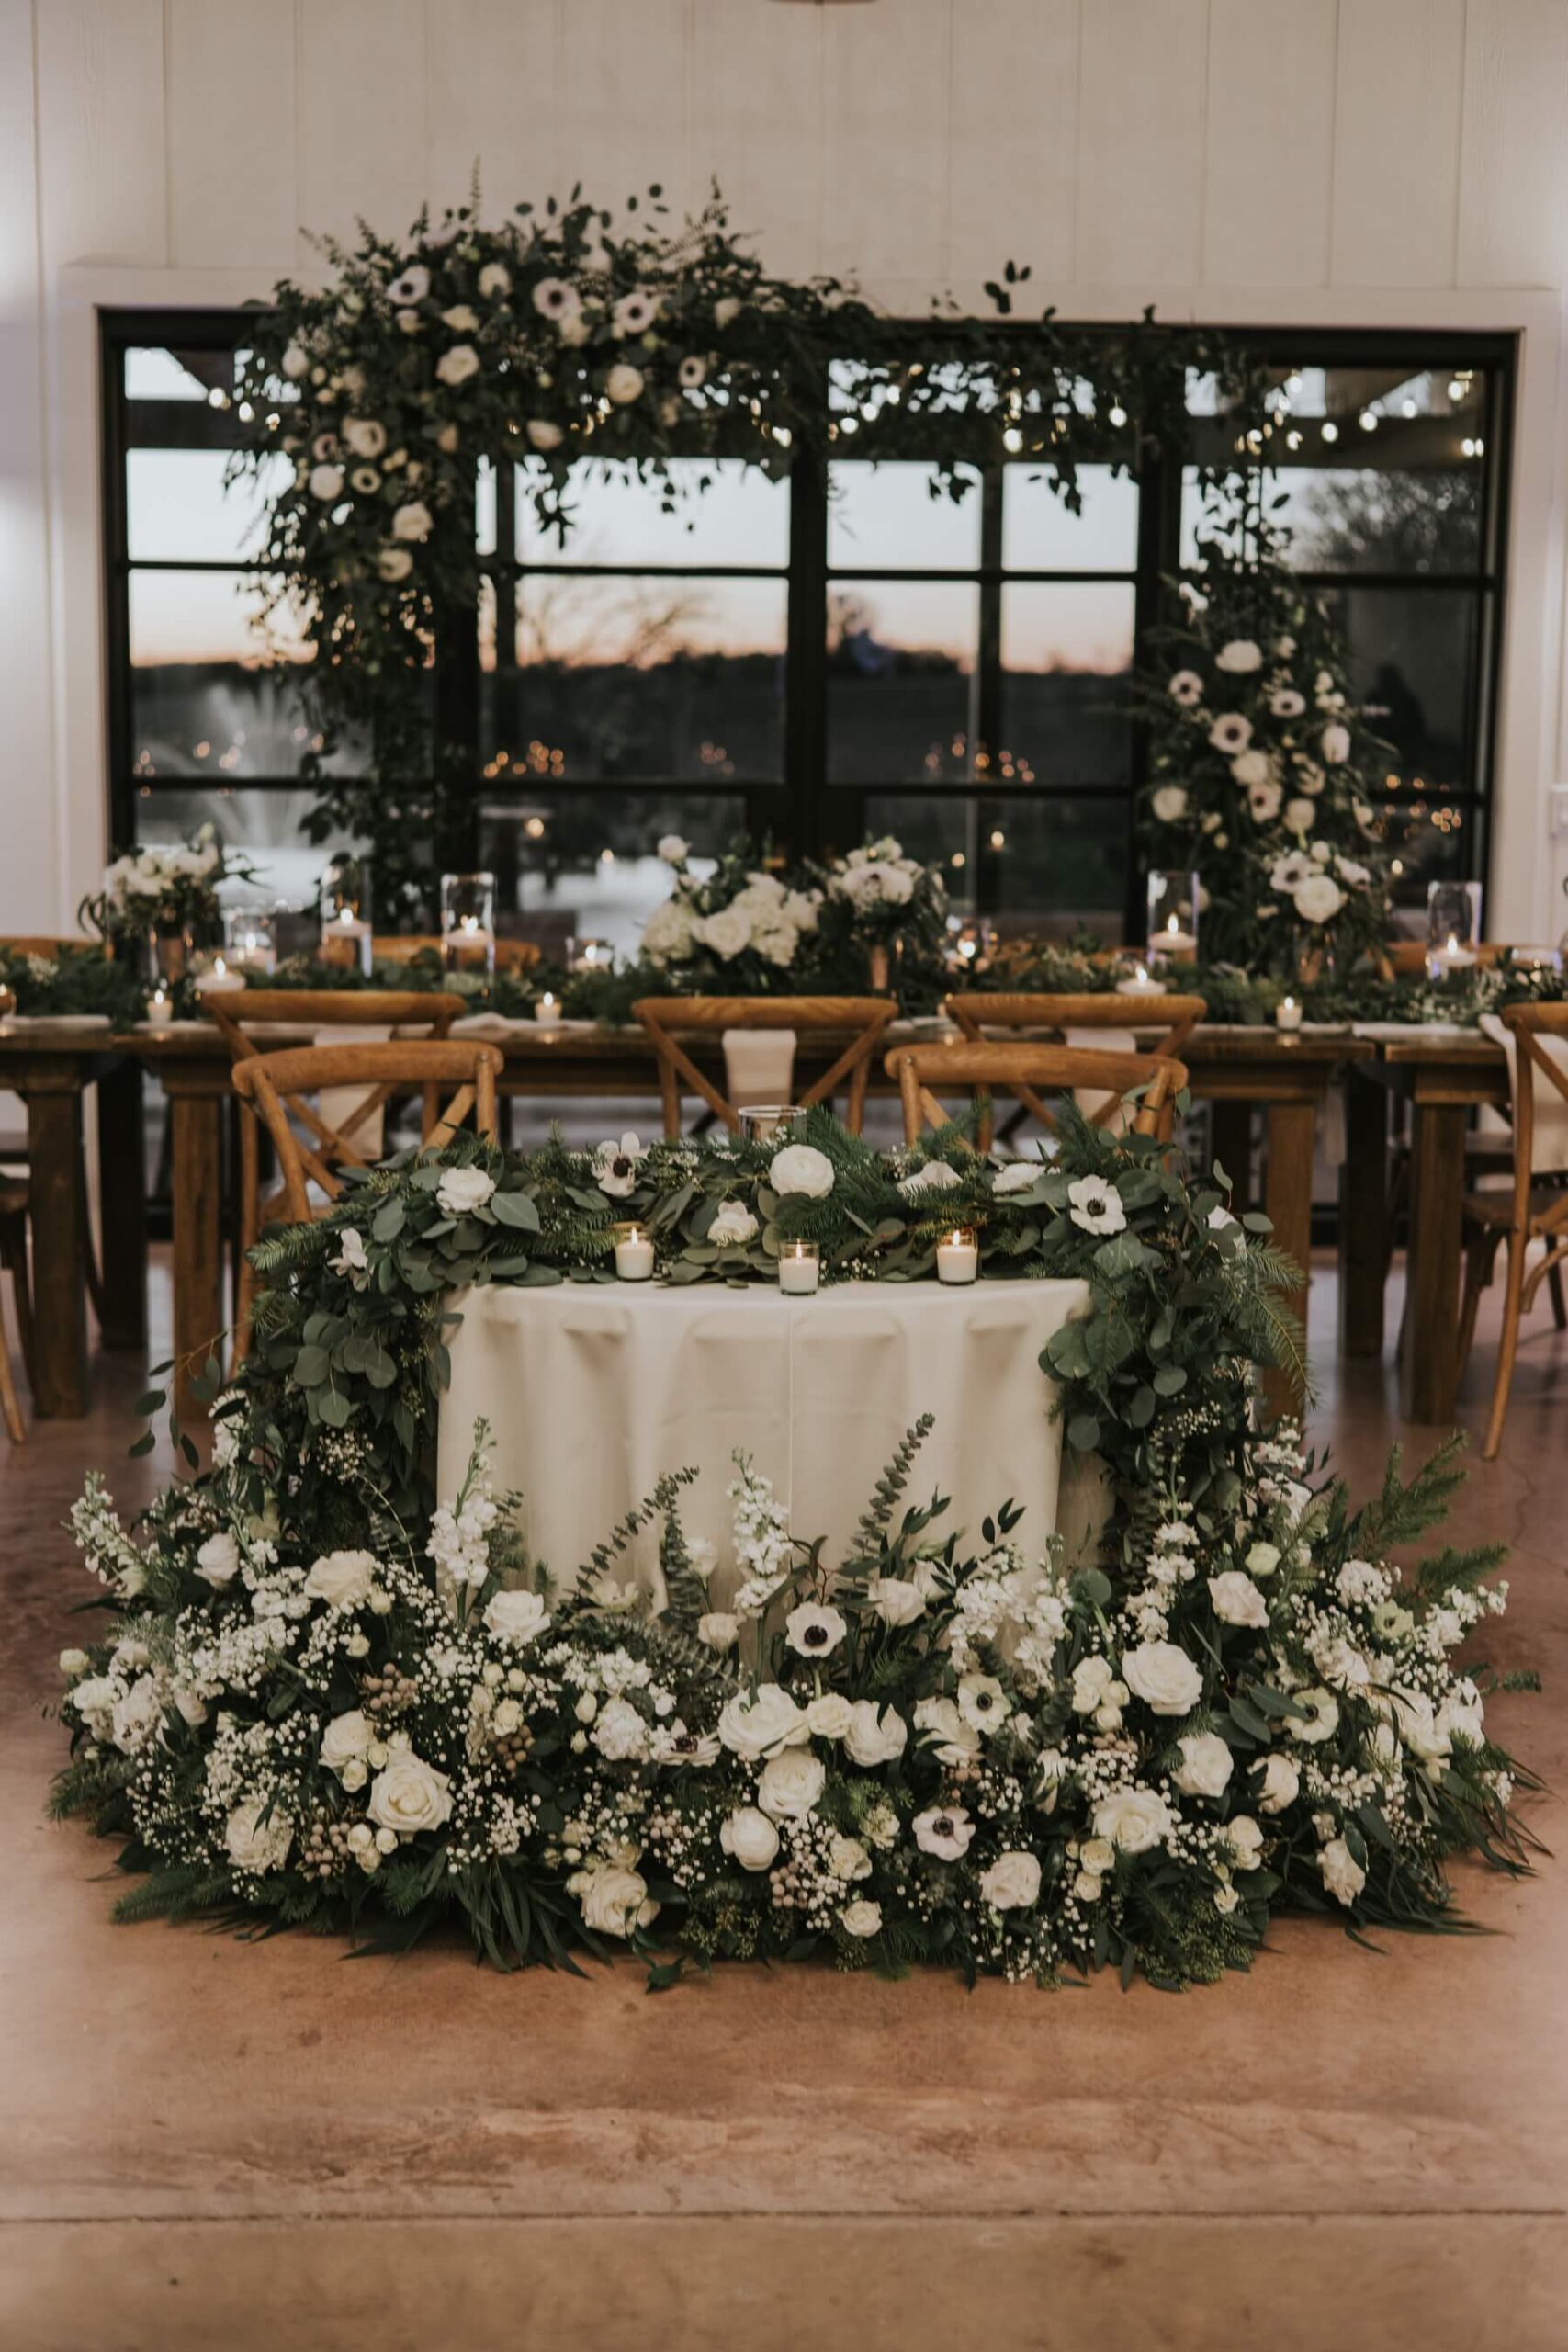 Green and white floral design at wedding reception by Edwards Floral Design